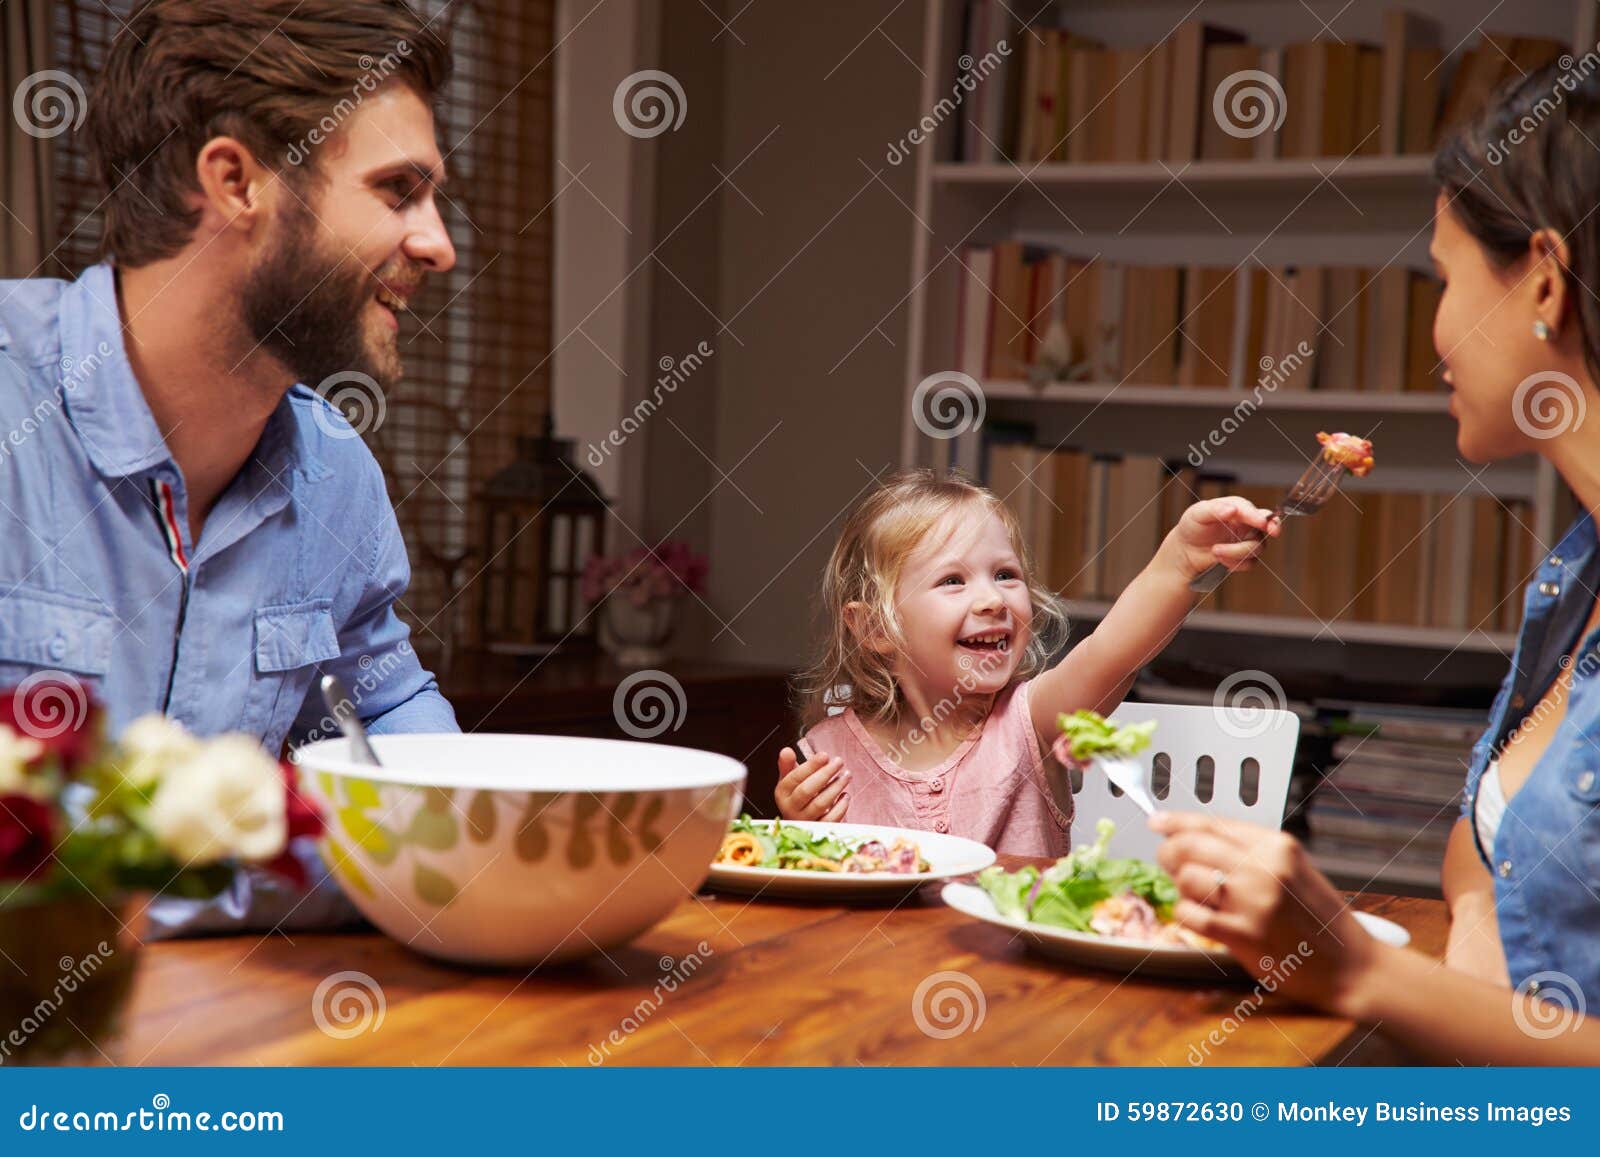 family eating an dinner at a dining table